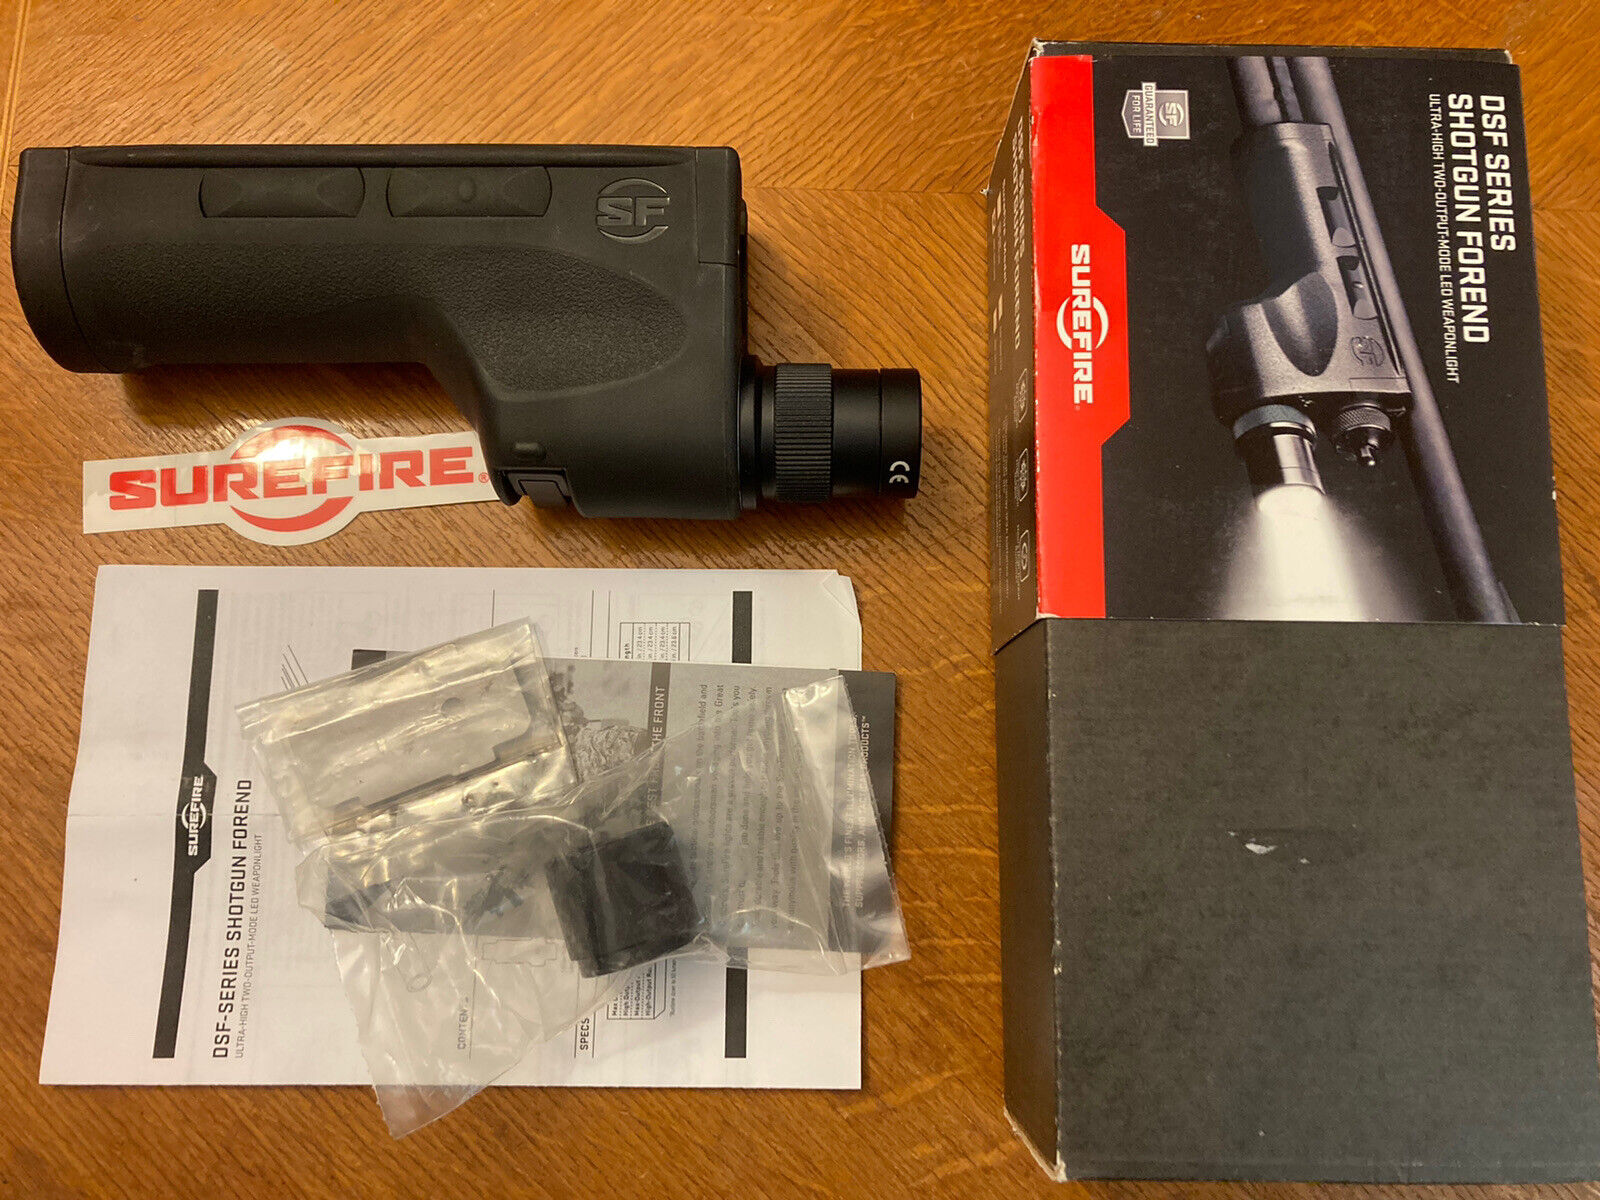 SureFire DSF Dedicated Shotgun Forend Weaponlight for Mossberg 500 / 590 DSF-500